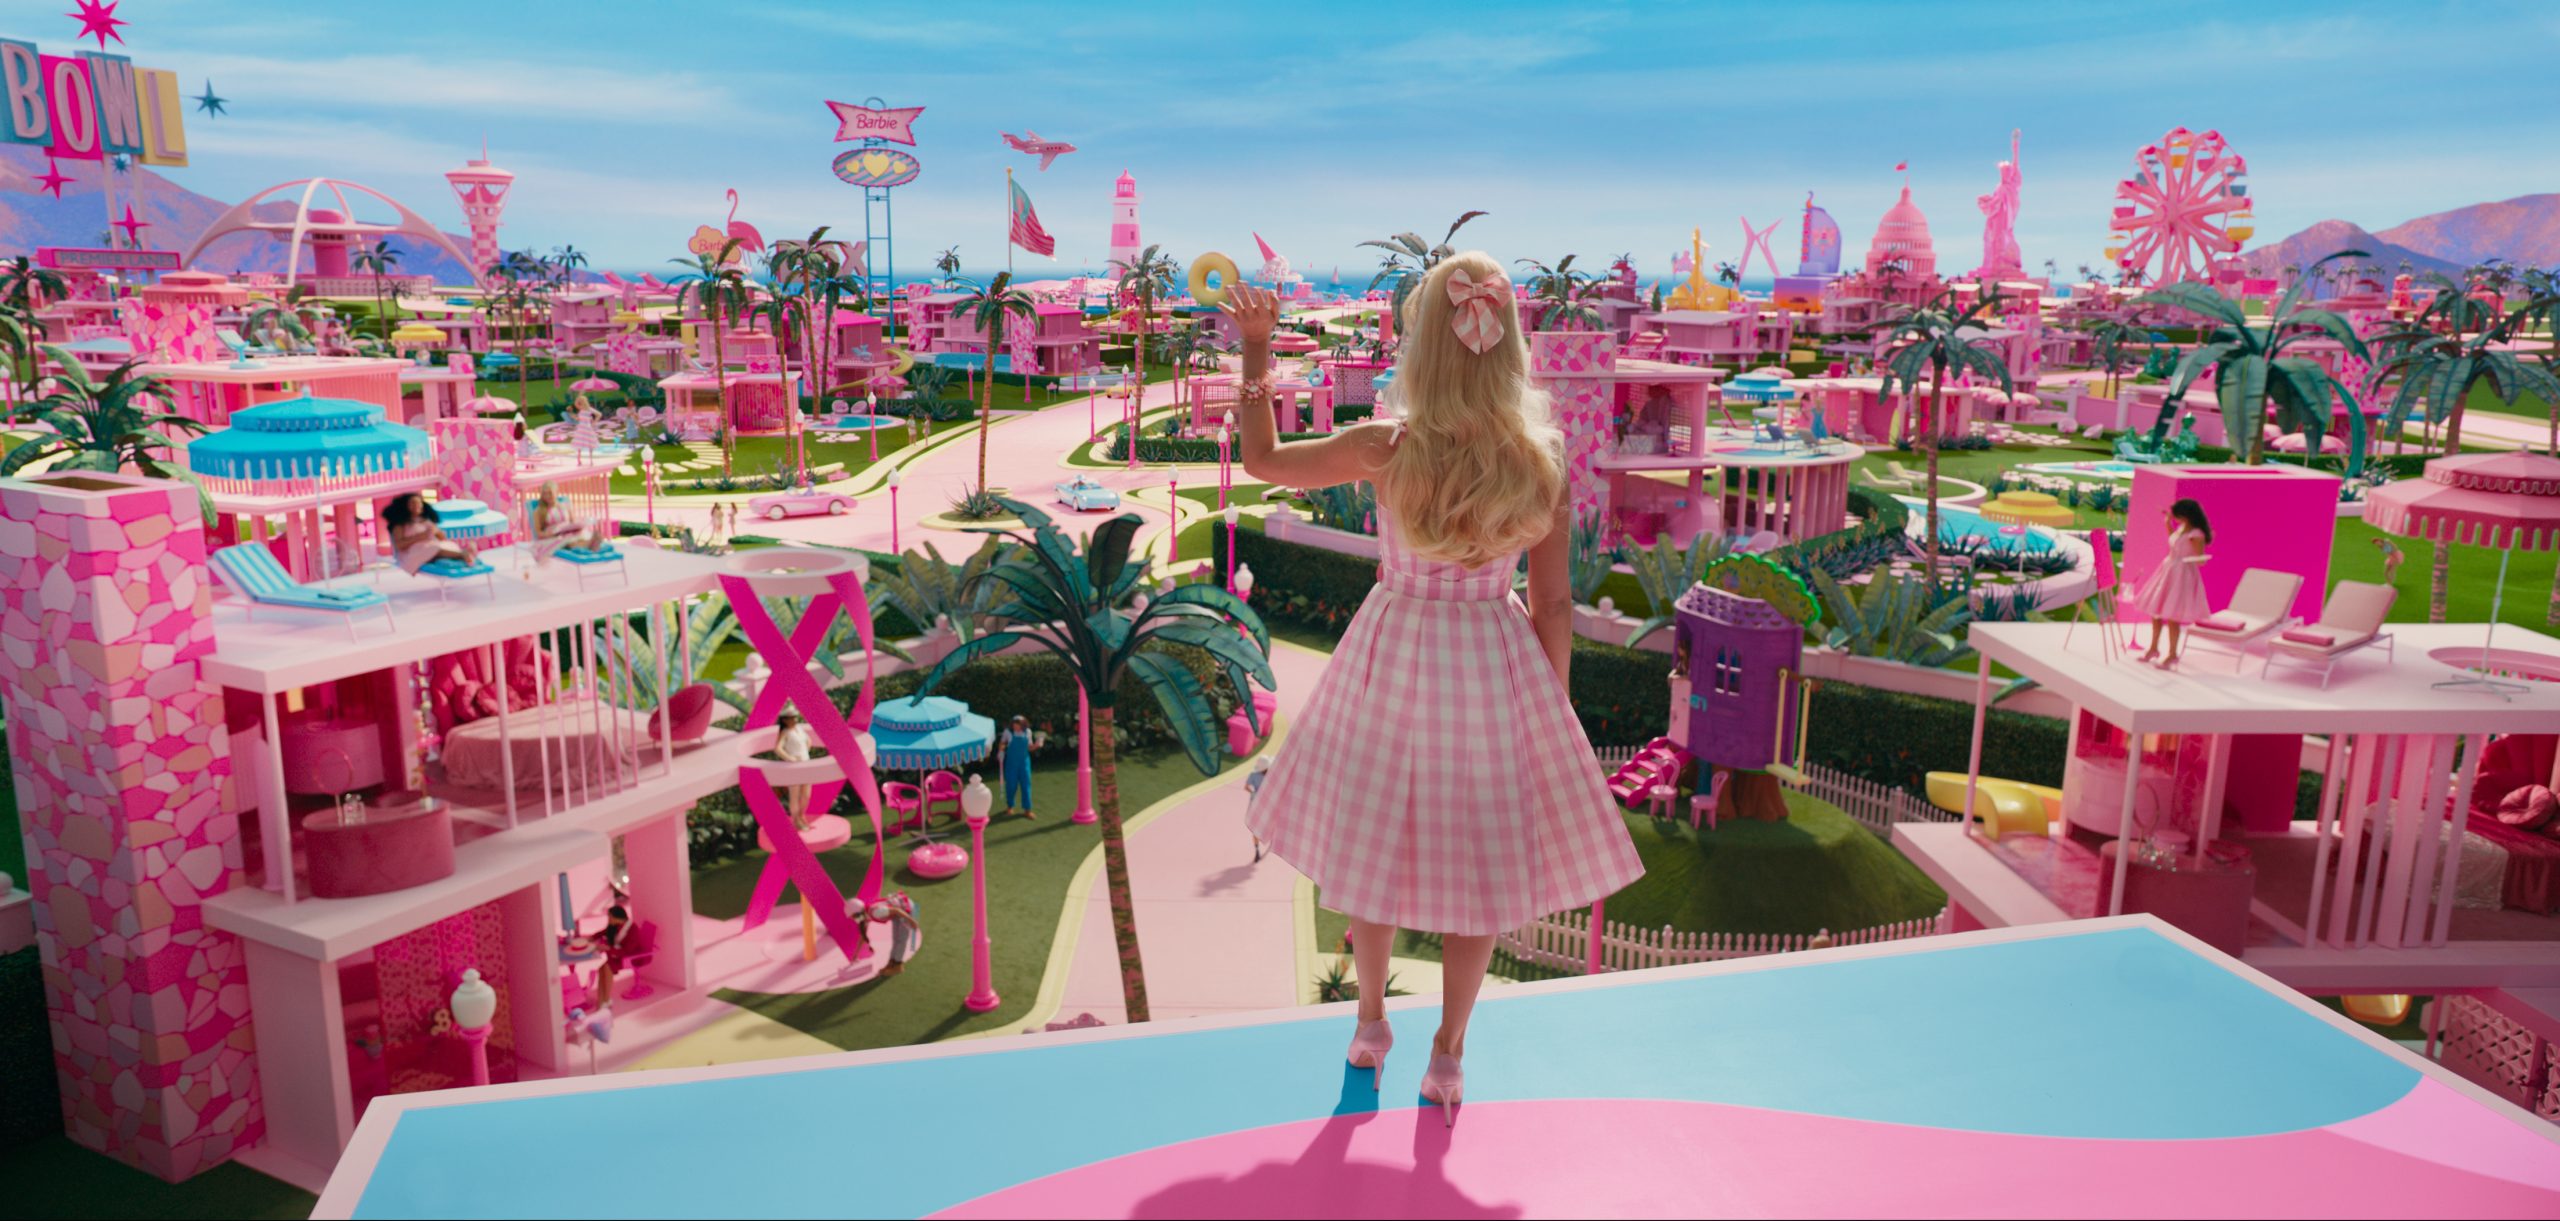 BARBIE-TP-0002 Film Name: BARBIE Copyright: © 2022 Warner Bros. Entertainment Inc. All Rights Reserved. Photo Credit: Courtesy Warner Bros. Pictures Caption: MARGOT ROBBIE as Barbie in Warner Bros. Pictures’ “BARBIE,” a Warner Bros. Pictures release. (PRESS KIT)